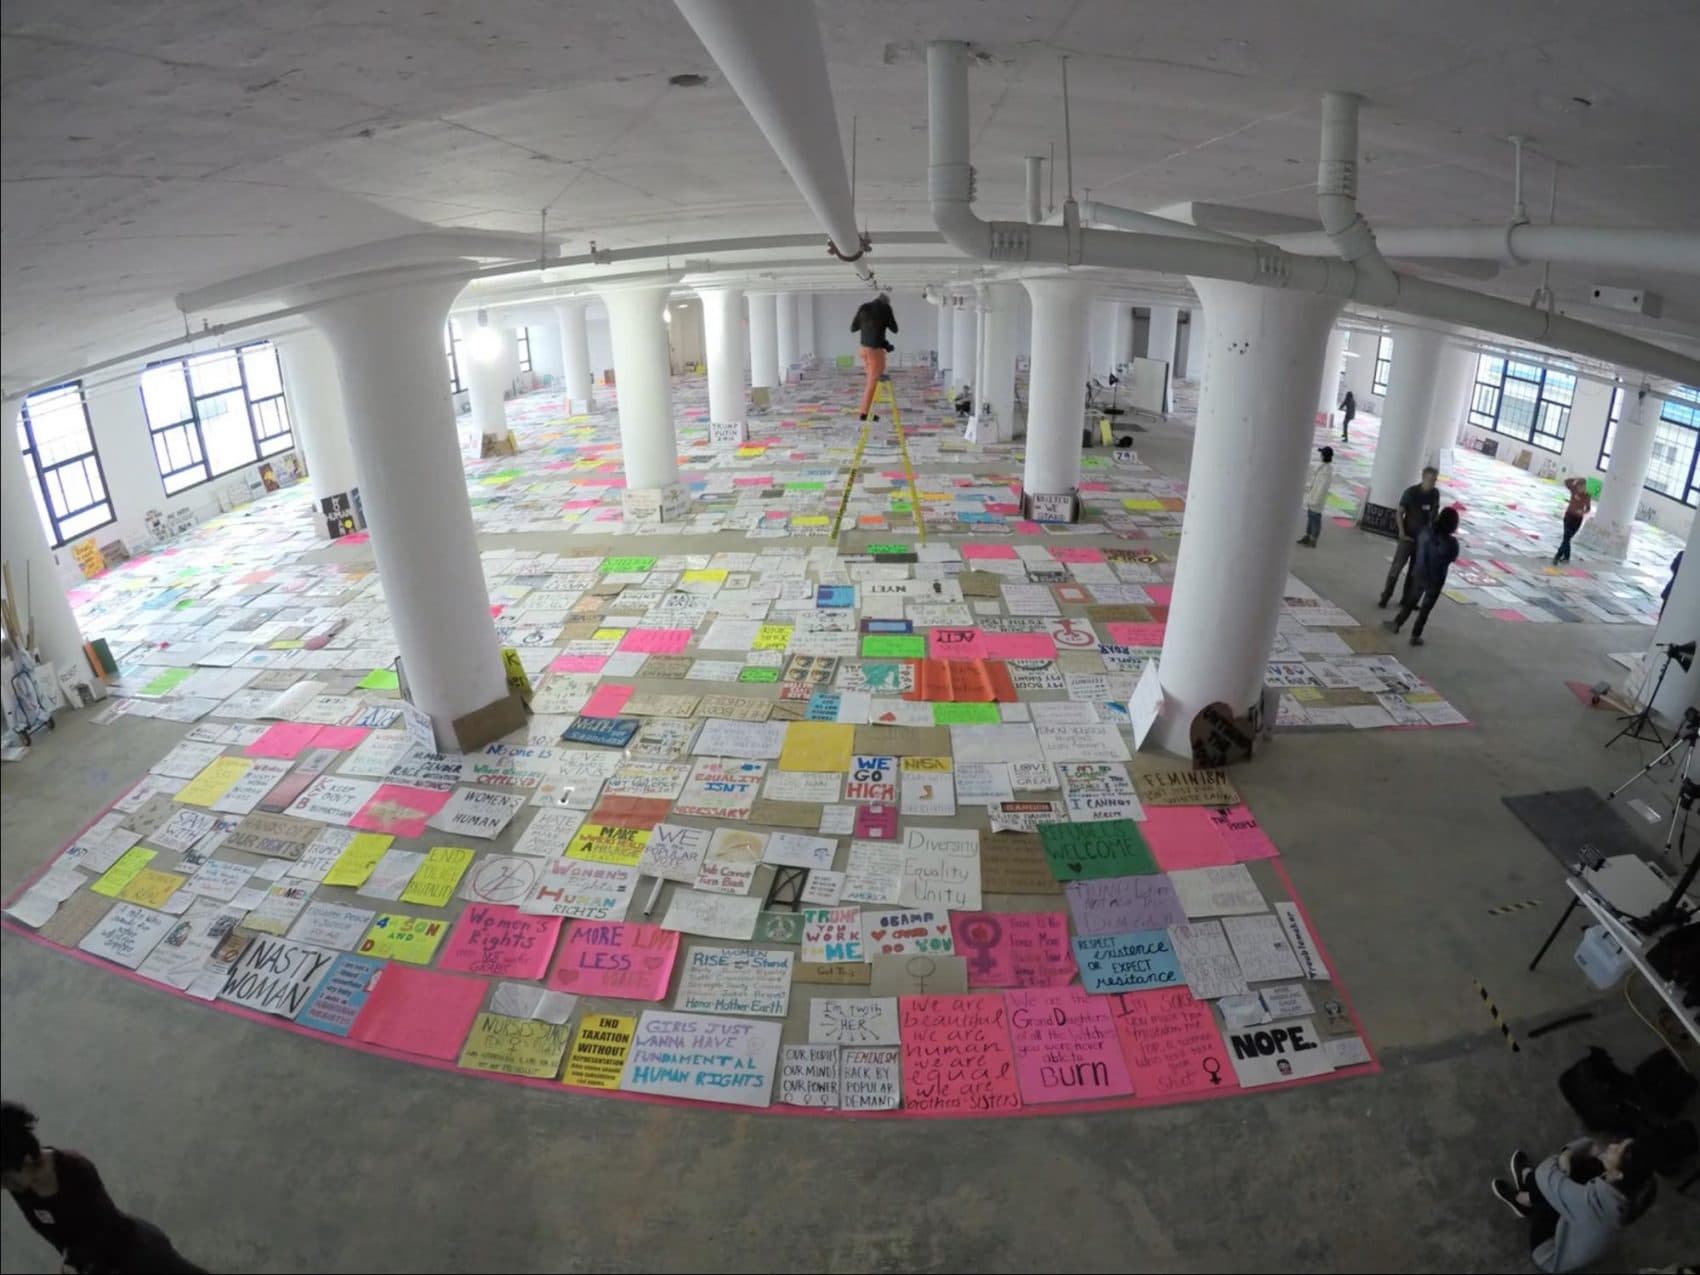 The team photographs all the posters they collected from the Women's March in Boston. (Courtesy Dietmar Offenhuber/Art of the March)